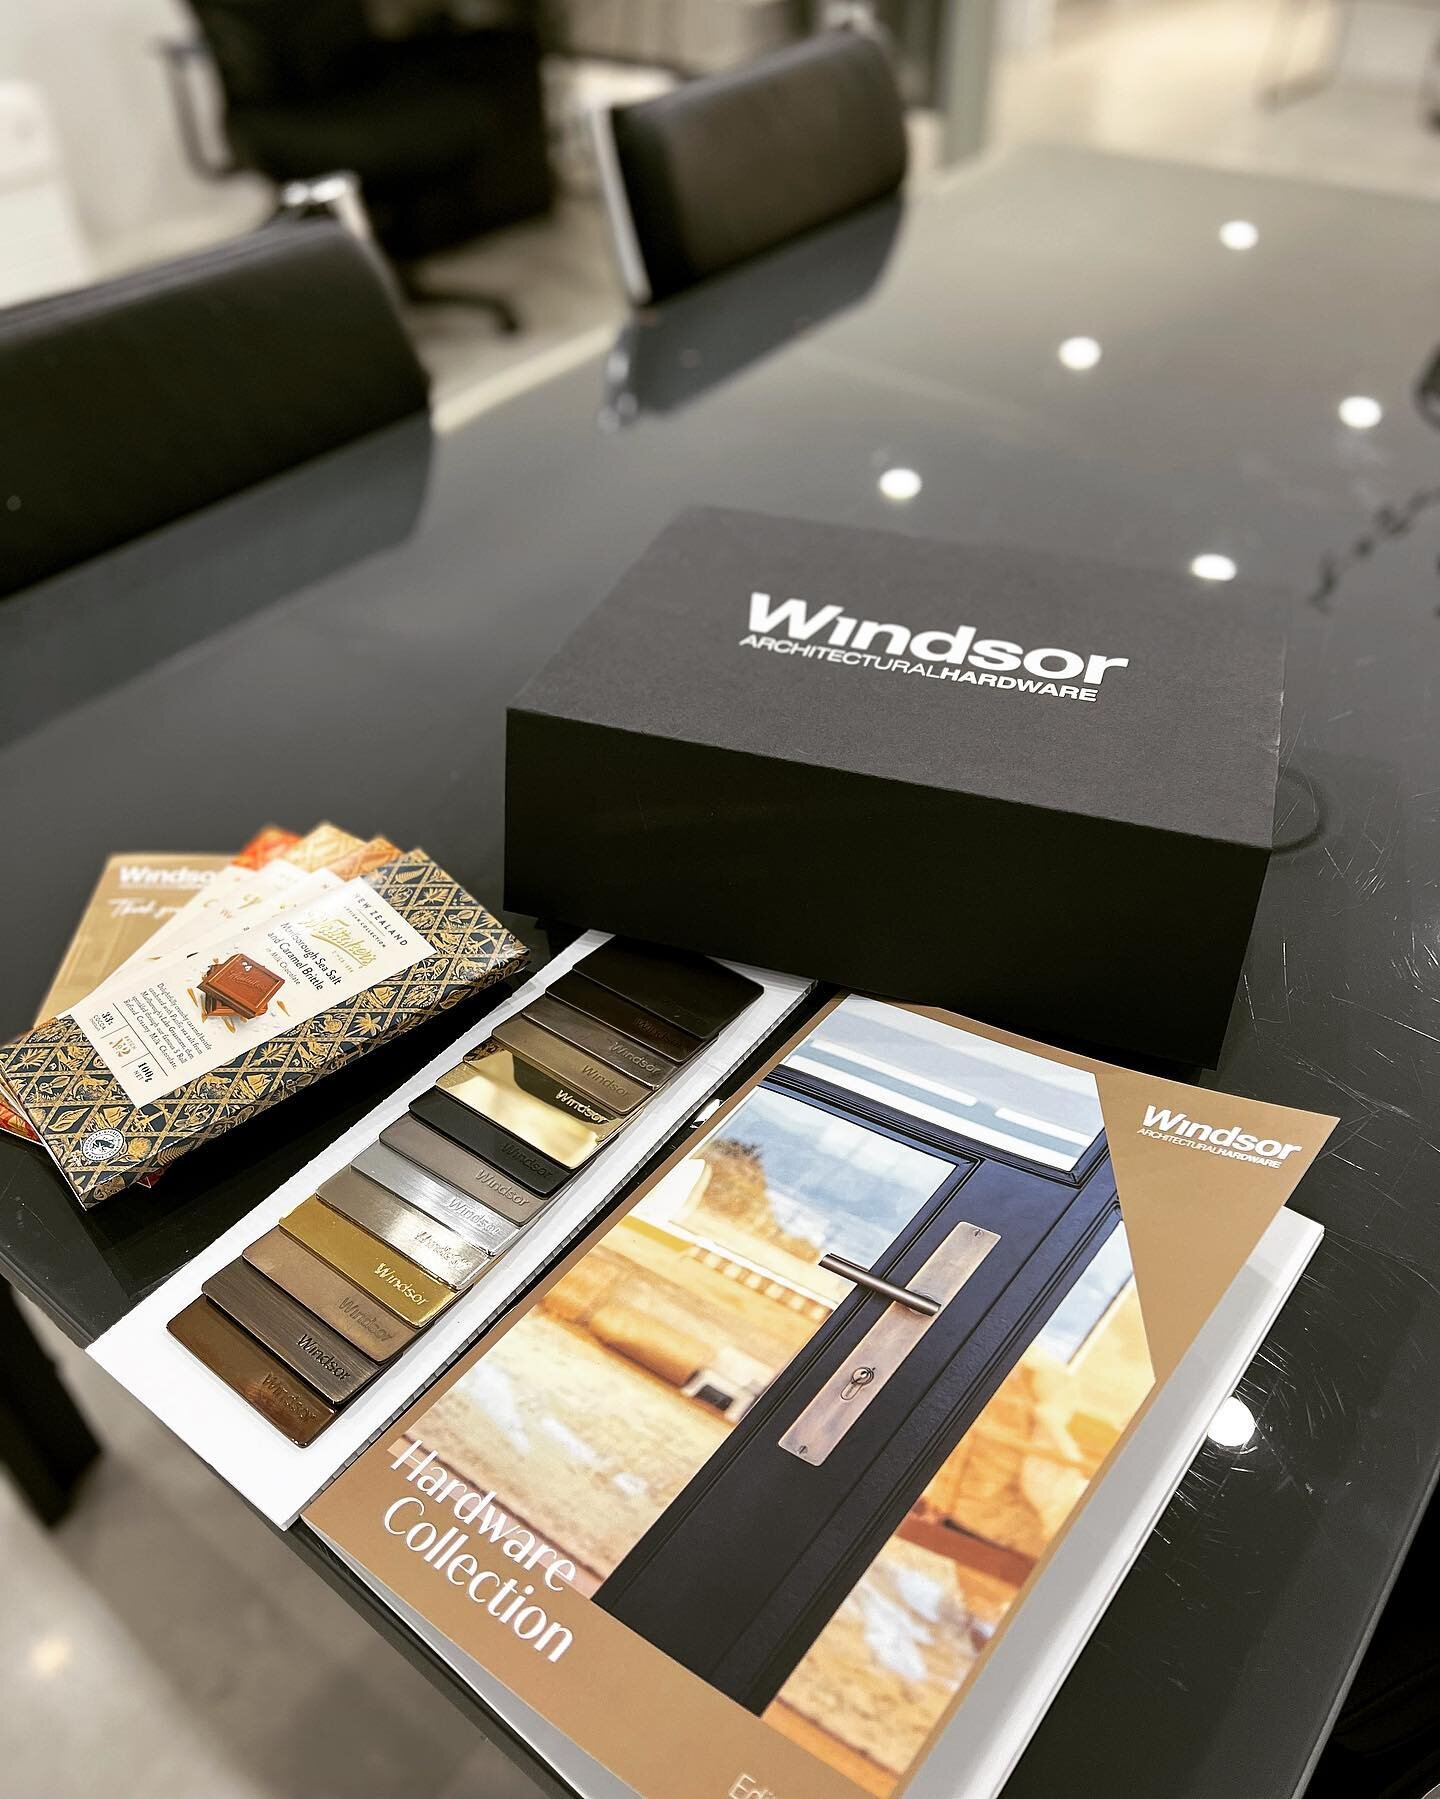 We love expanding our product specifications library&hellip;especially when we receive PR packages that include Whittakers chocolate. 🤤🇳🇿🍫 Thank you @windsorhardware 👌